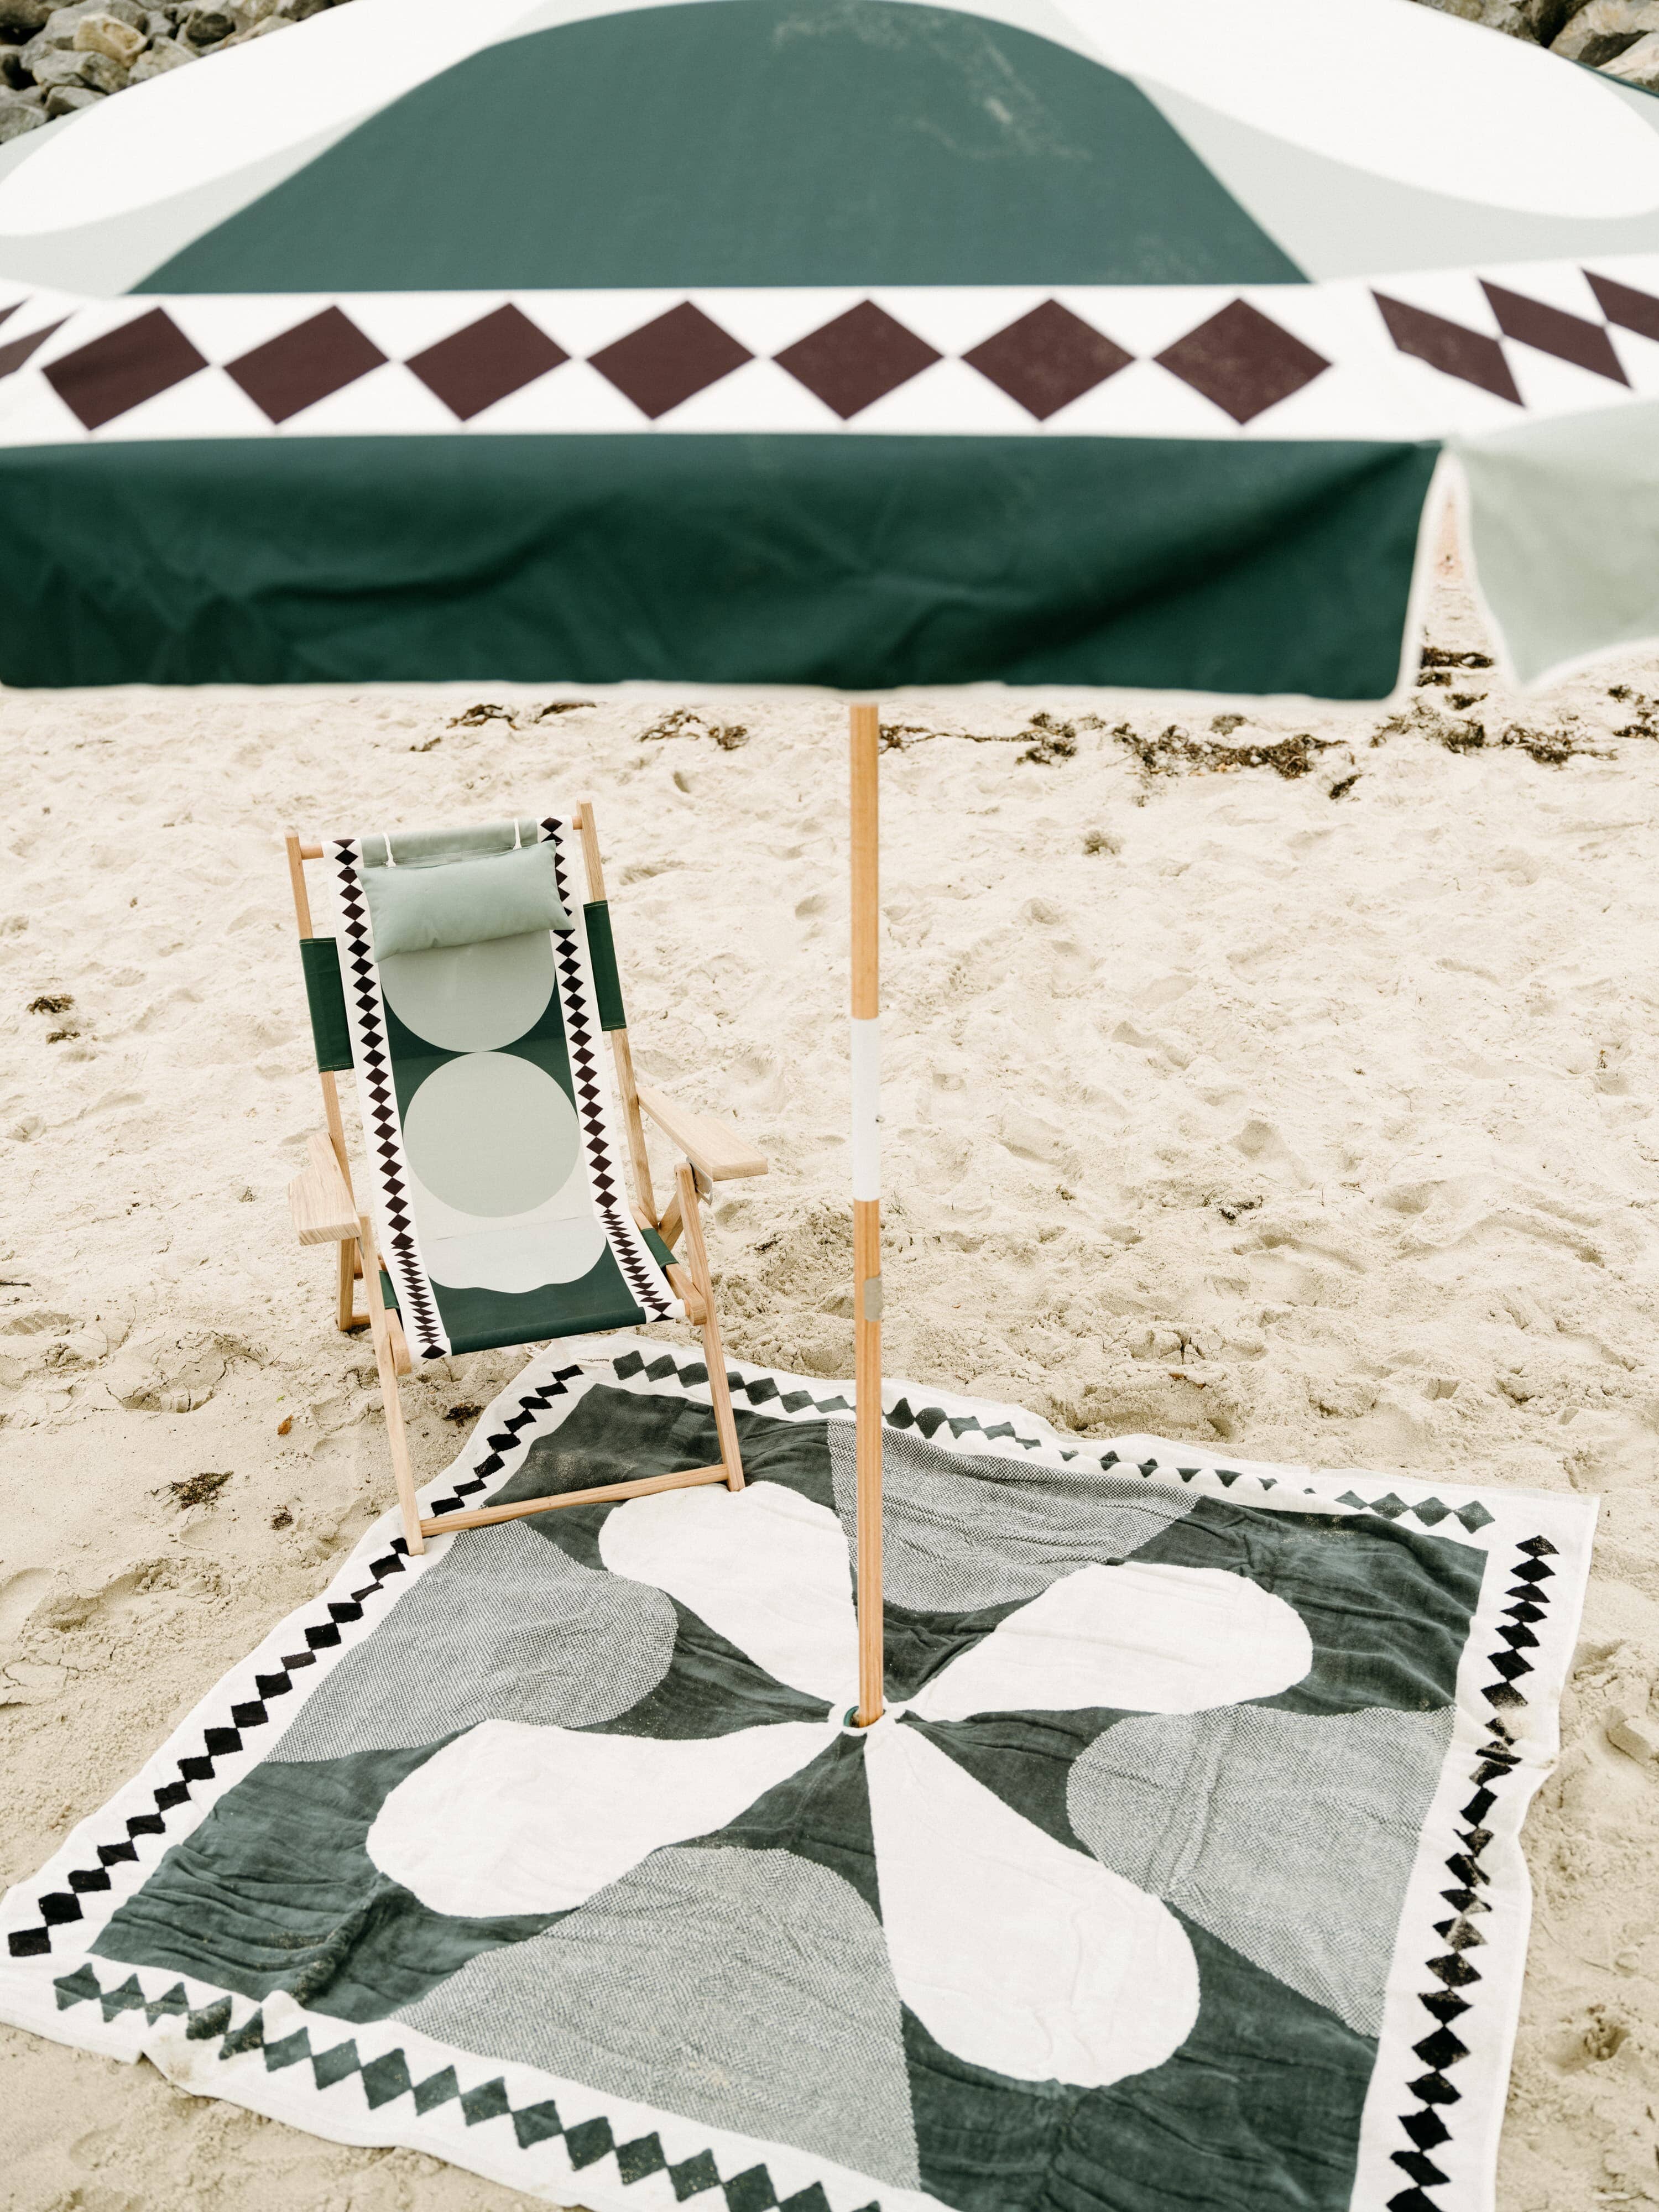 Beach set up with blanket, chair and umbrella